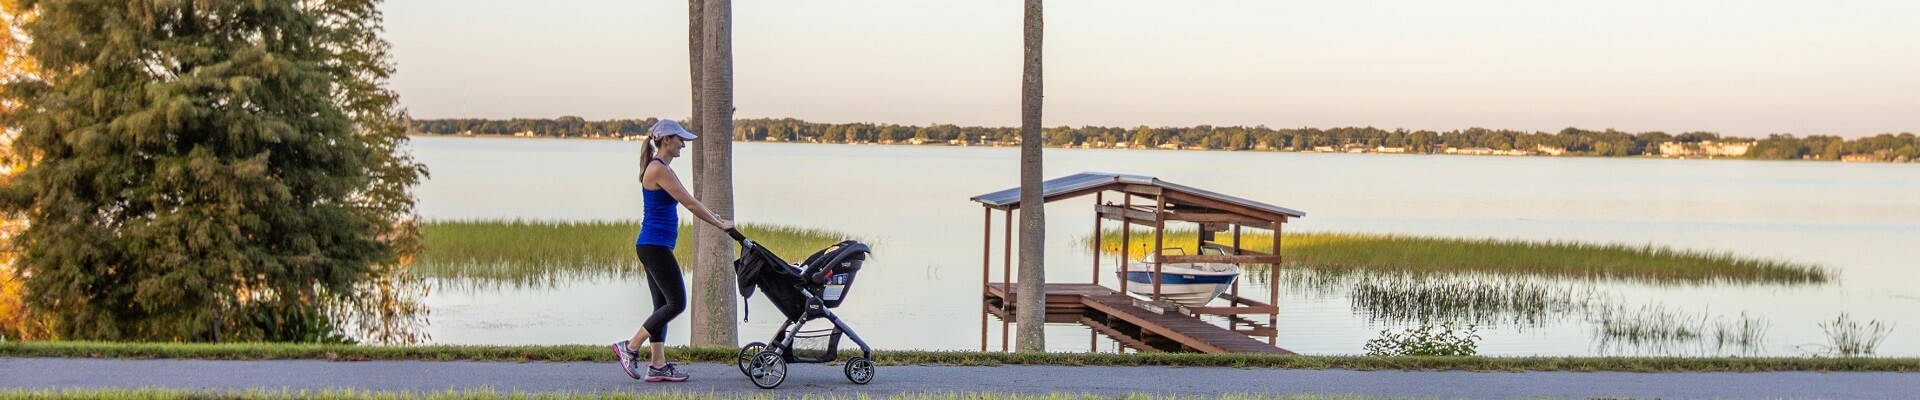 A woman is walking around a Winter Haven, Florida lake while pushing her baby's stroller.